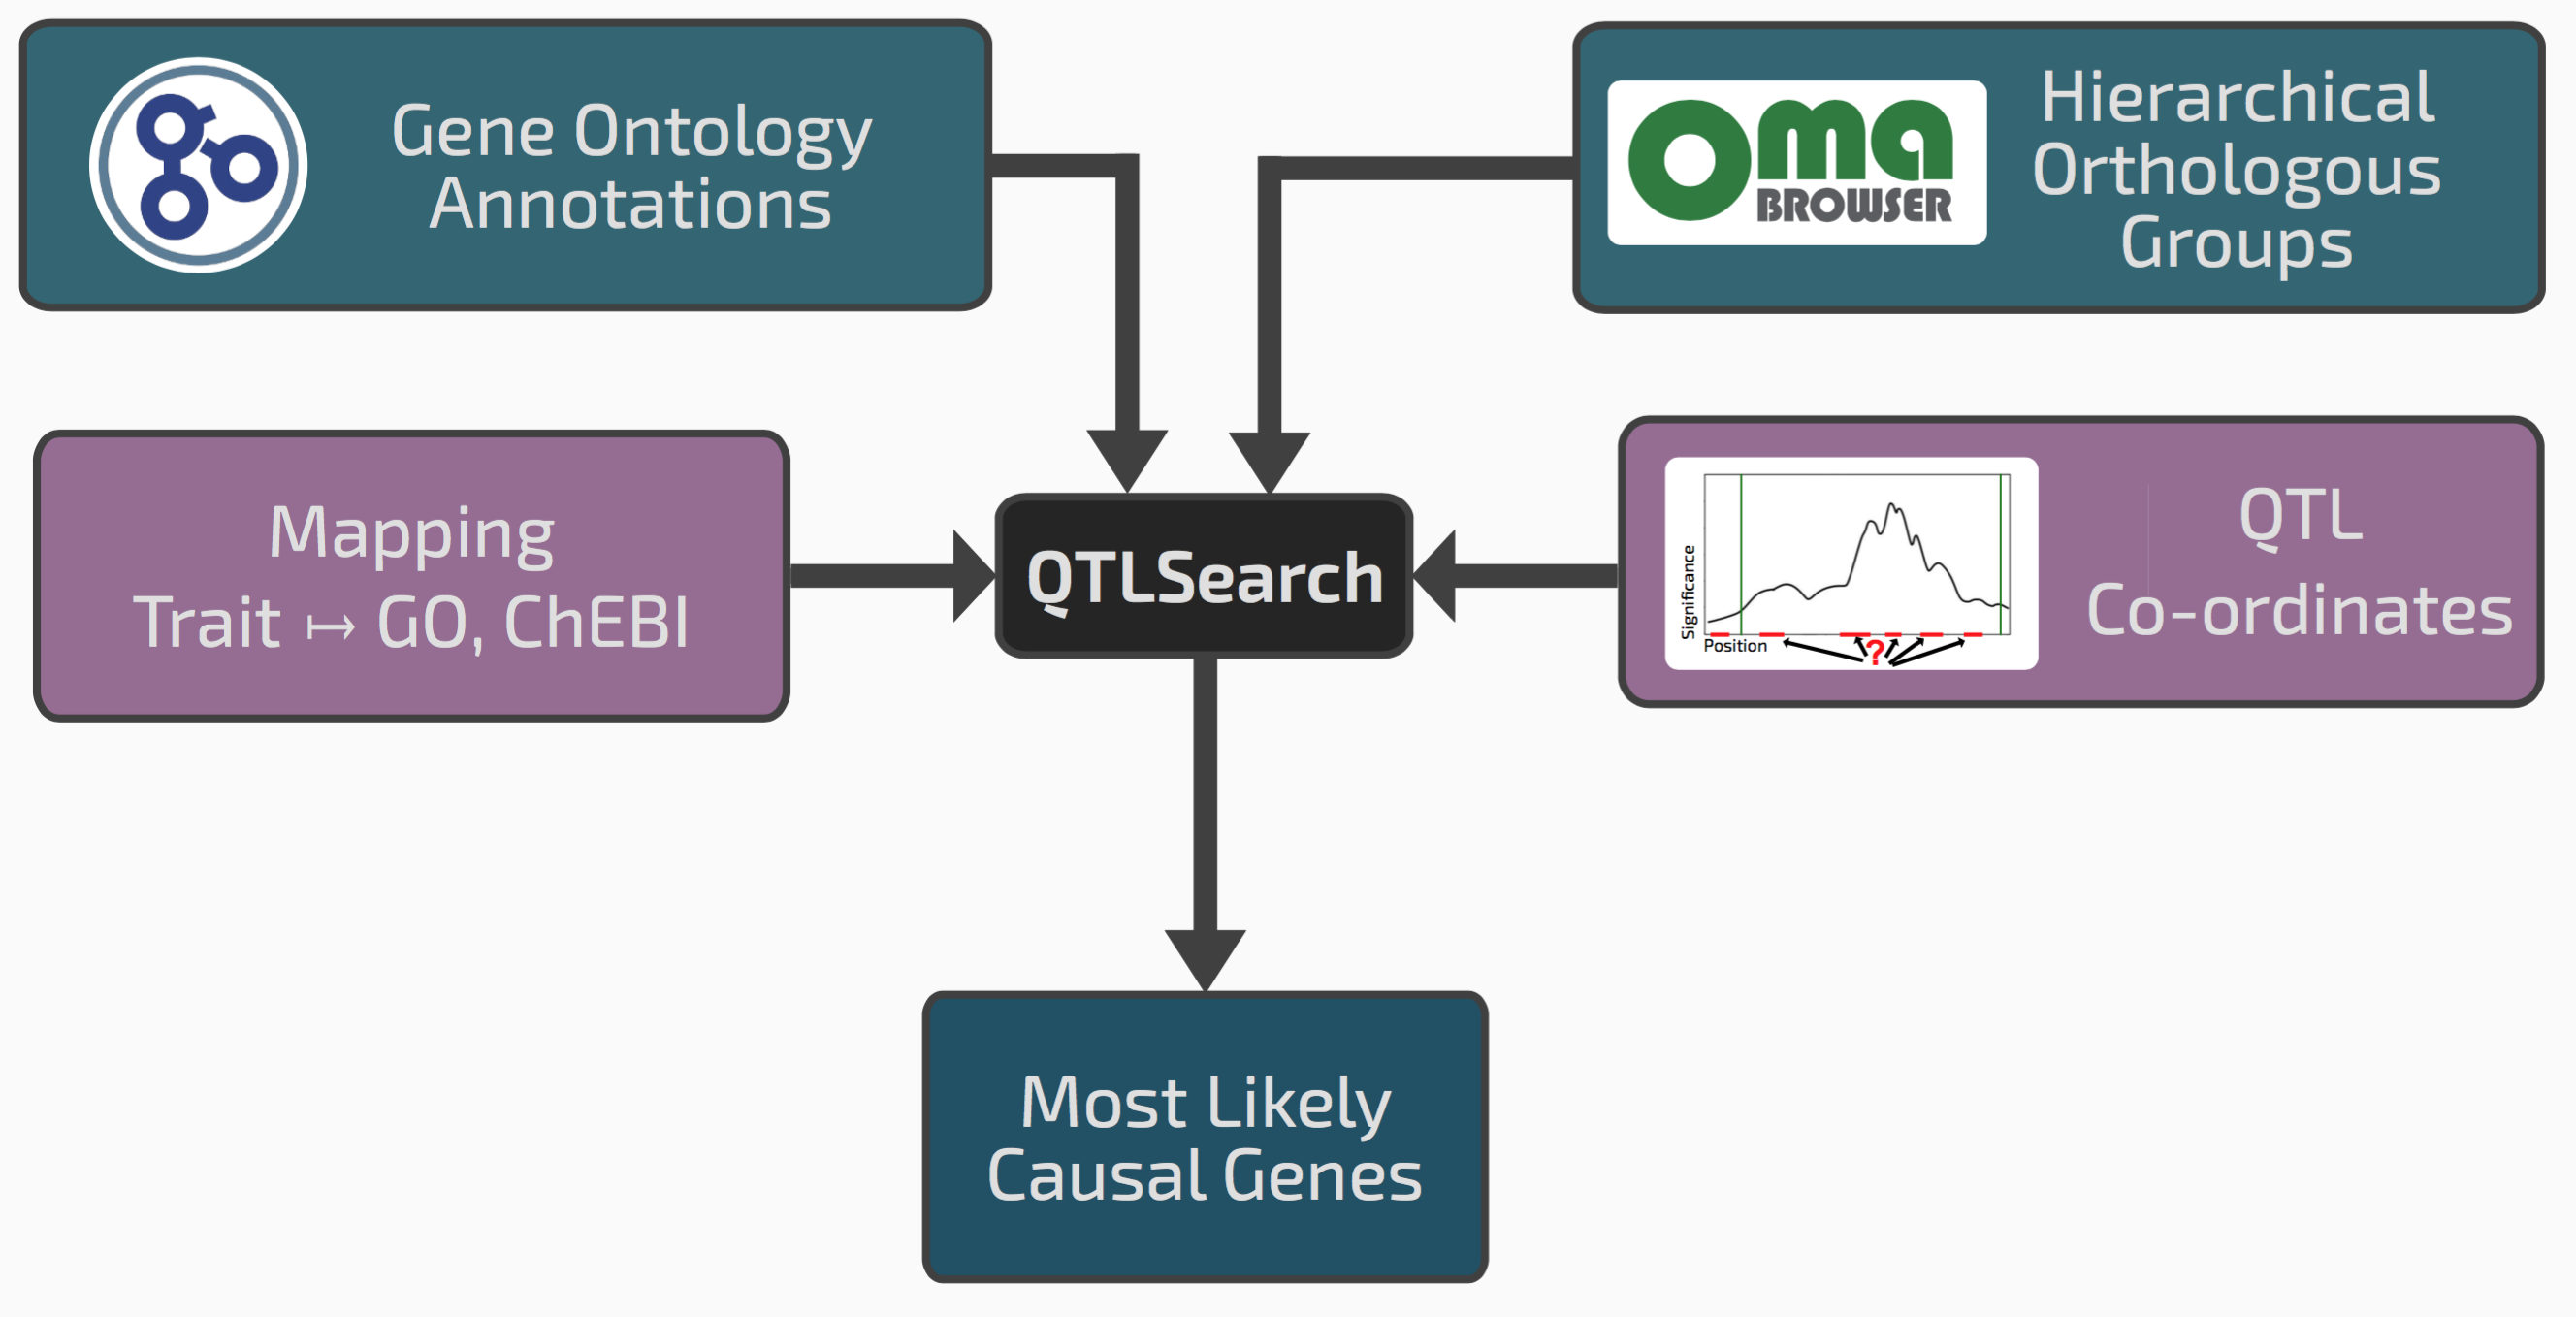 Conceptual overview of QTLsearch